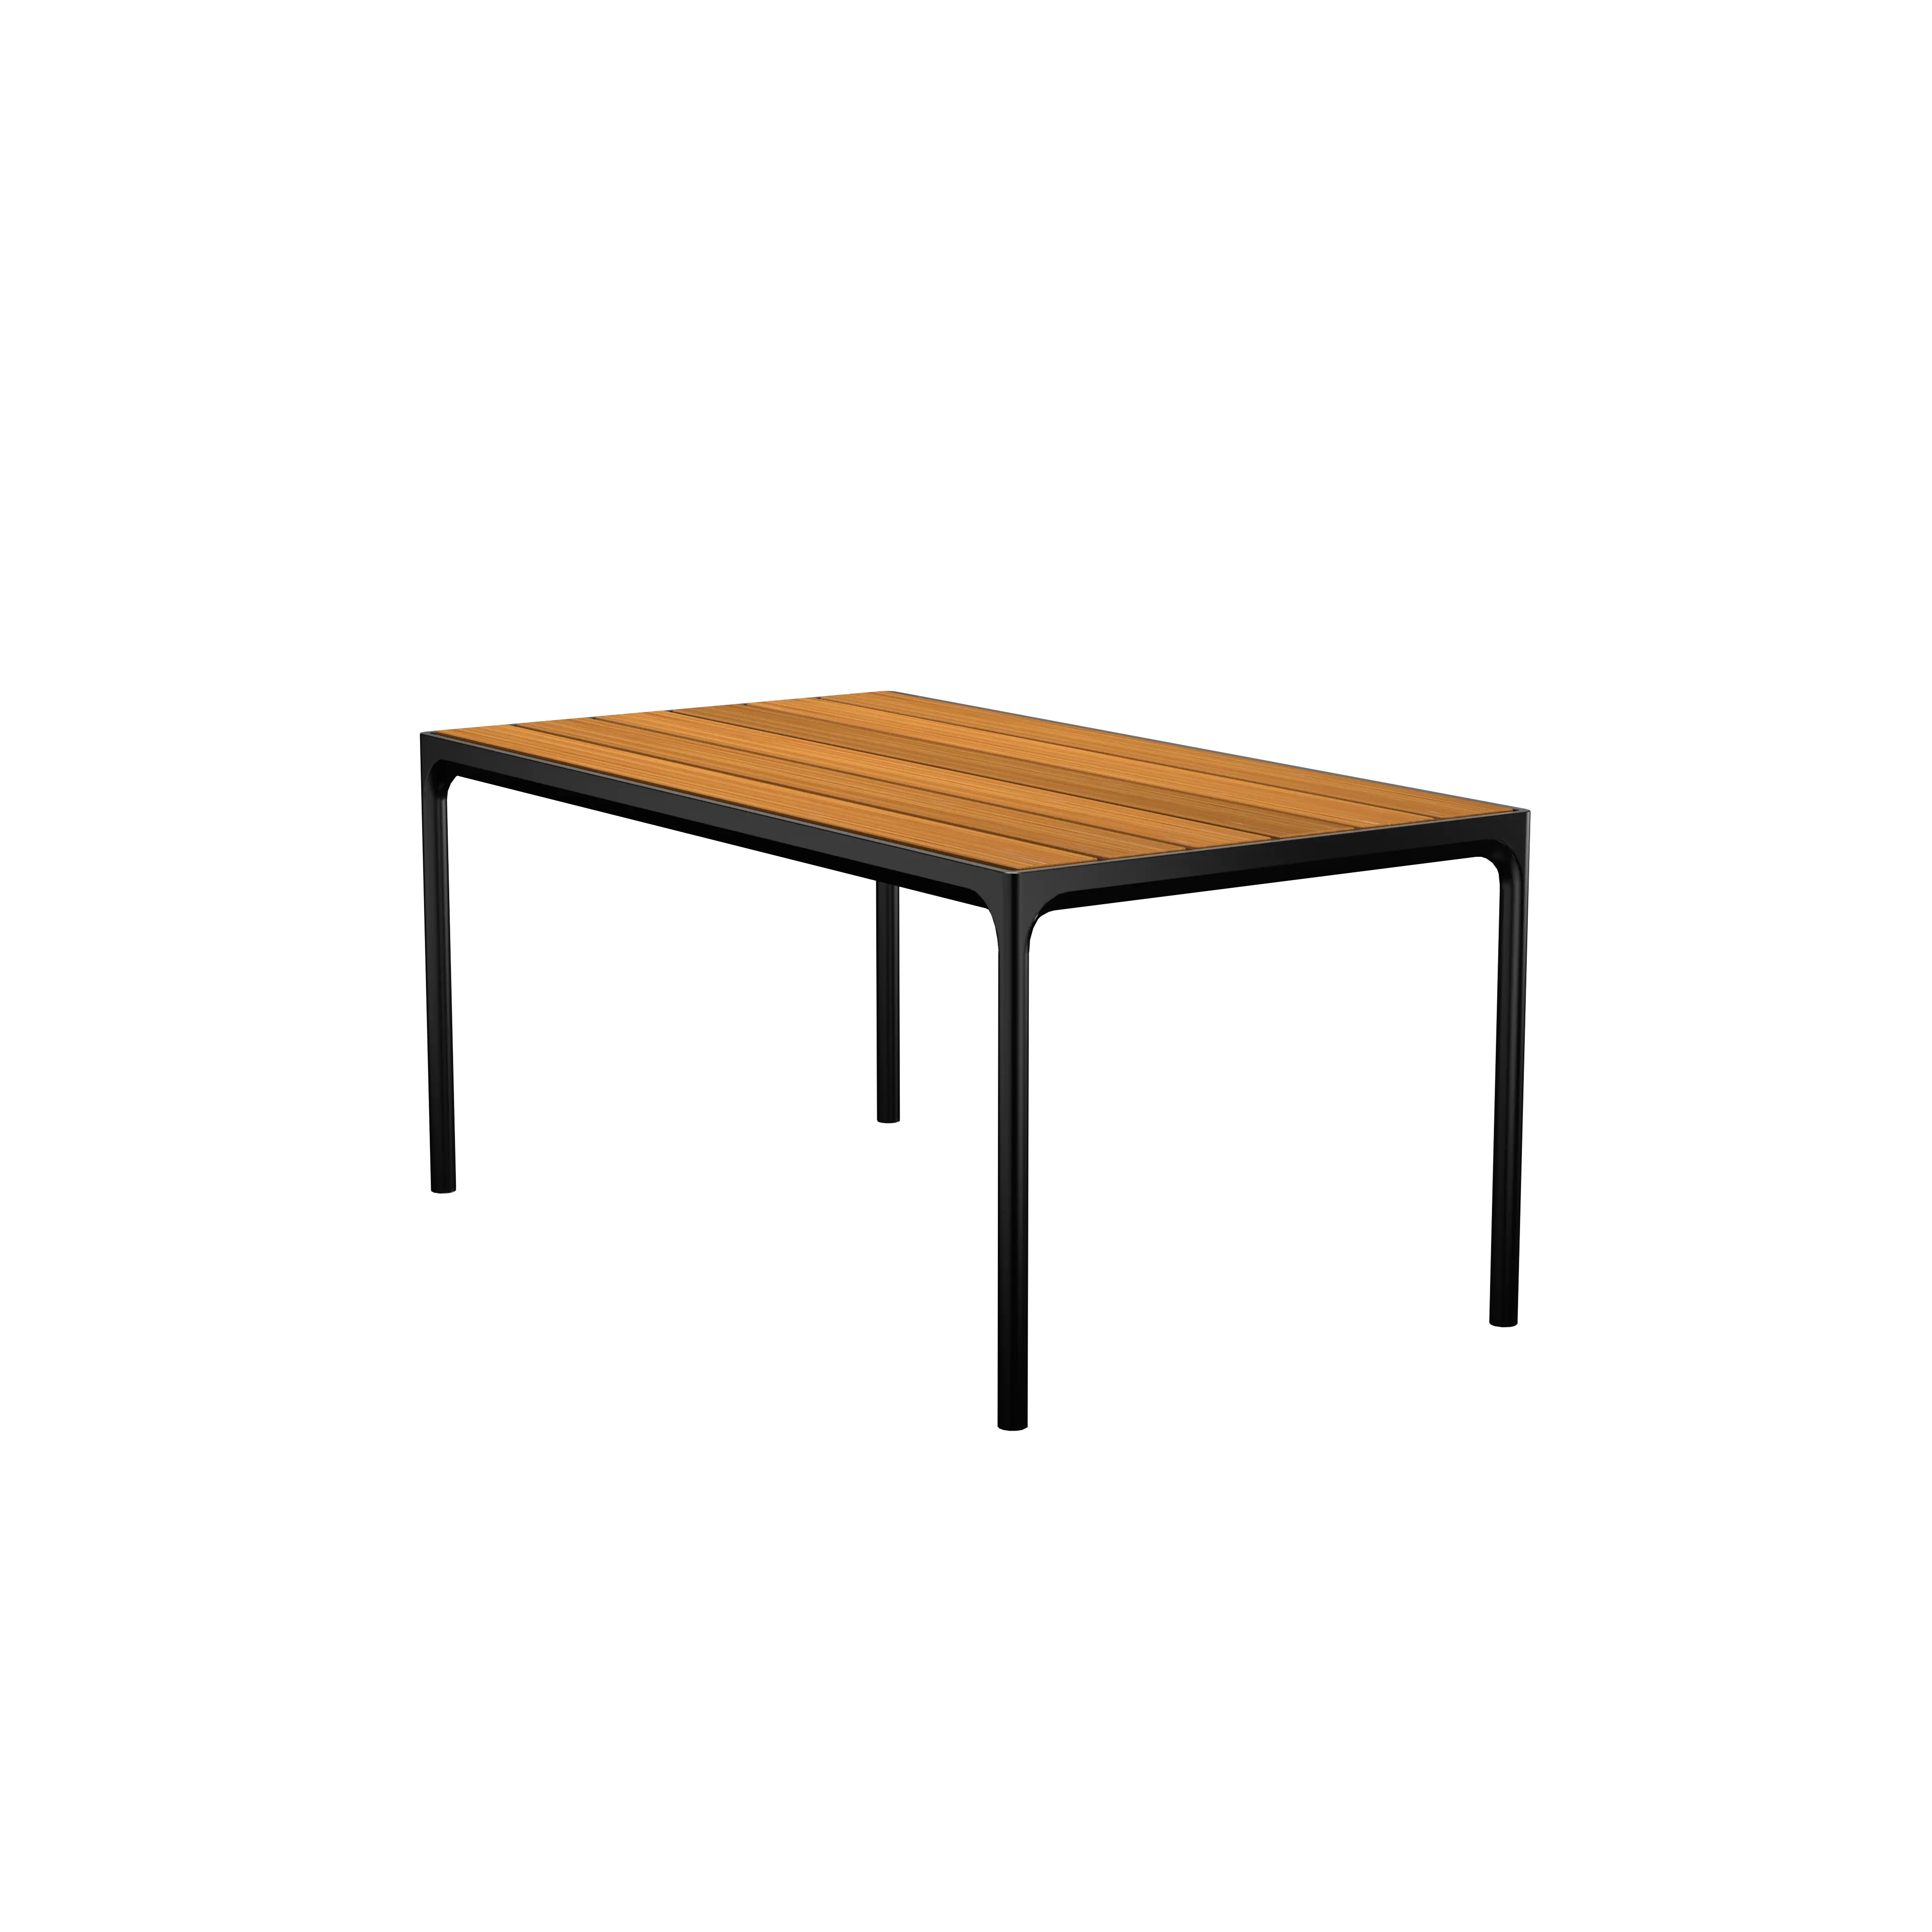 Four dining table 90 x 160 cm - Bamboo, black